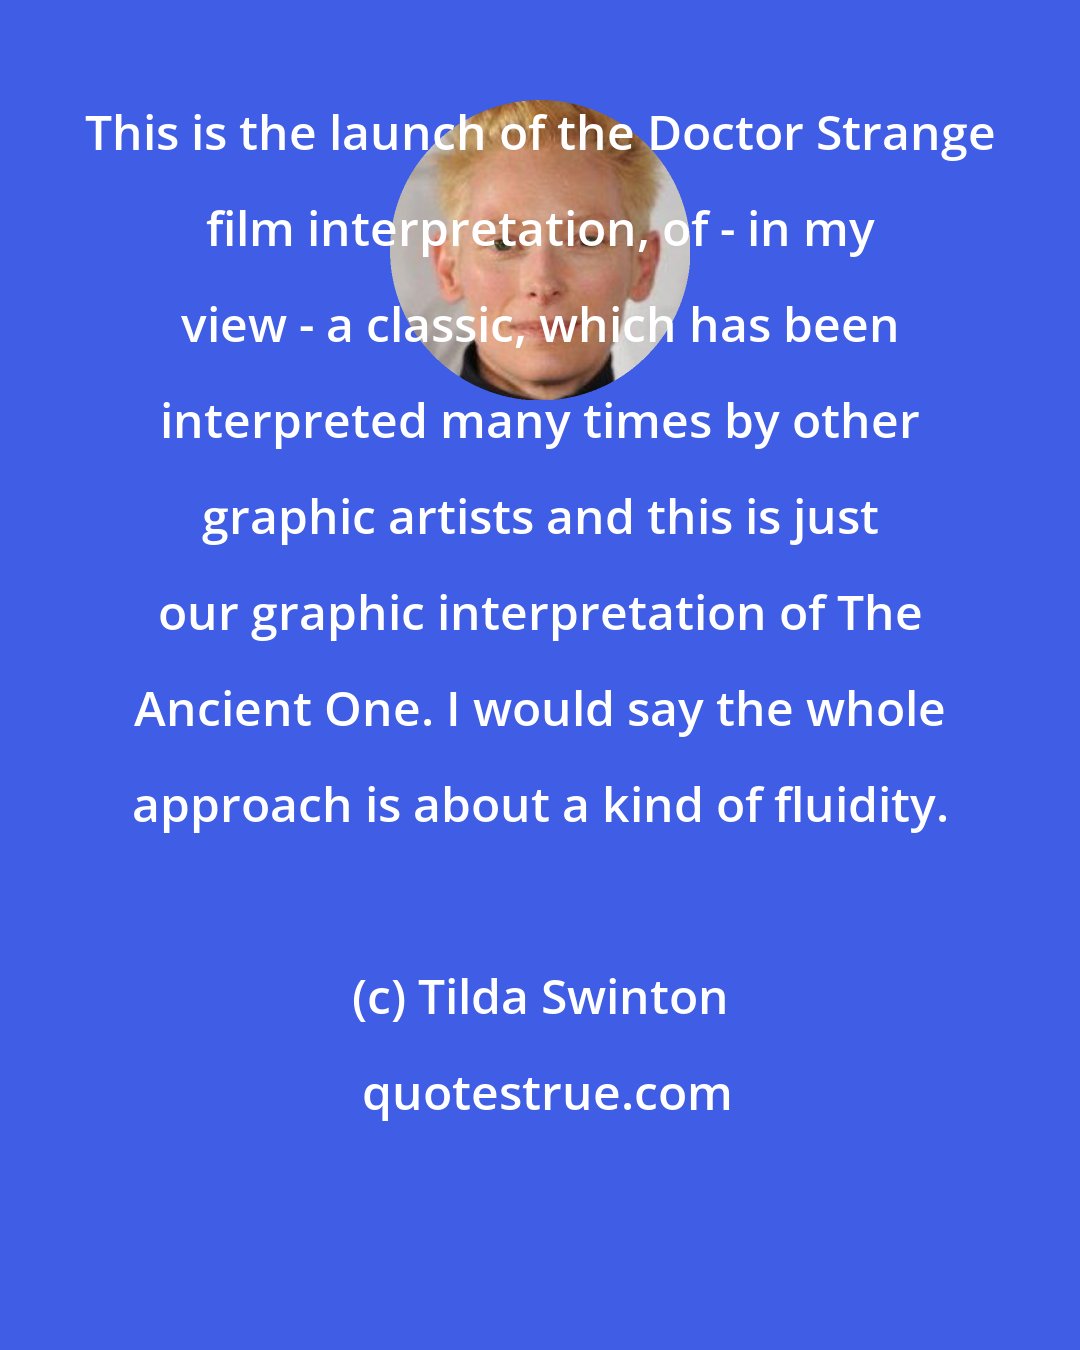 Tilda Swinton: This is the launch of the Doctor Strange film interpretation, of - in my view - a classic, which has been interpreted many times by other graphic artists and this is just our graphic interpretation of The Ancient One. I would say the whole approach is about a kind of fluidity.